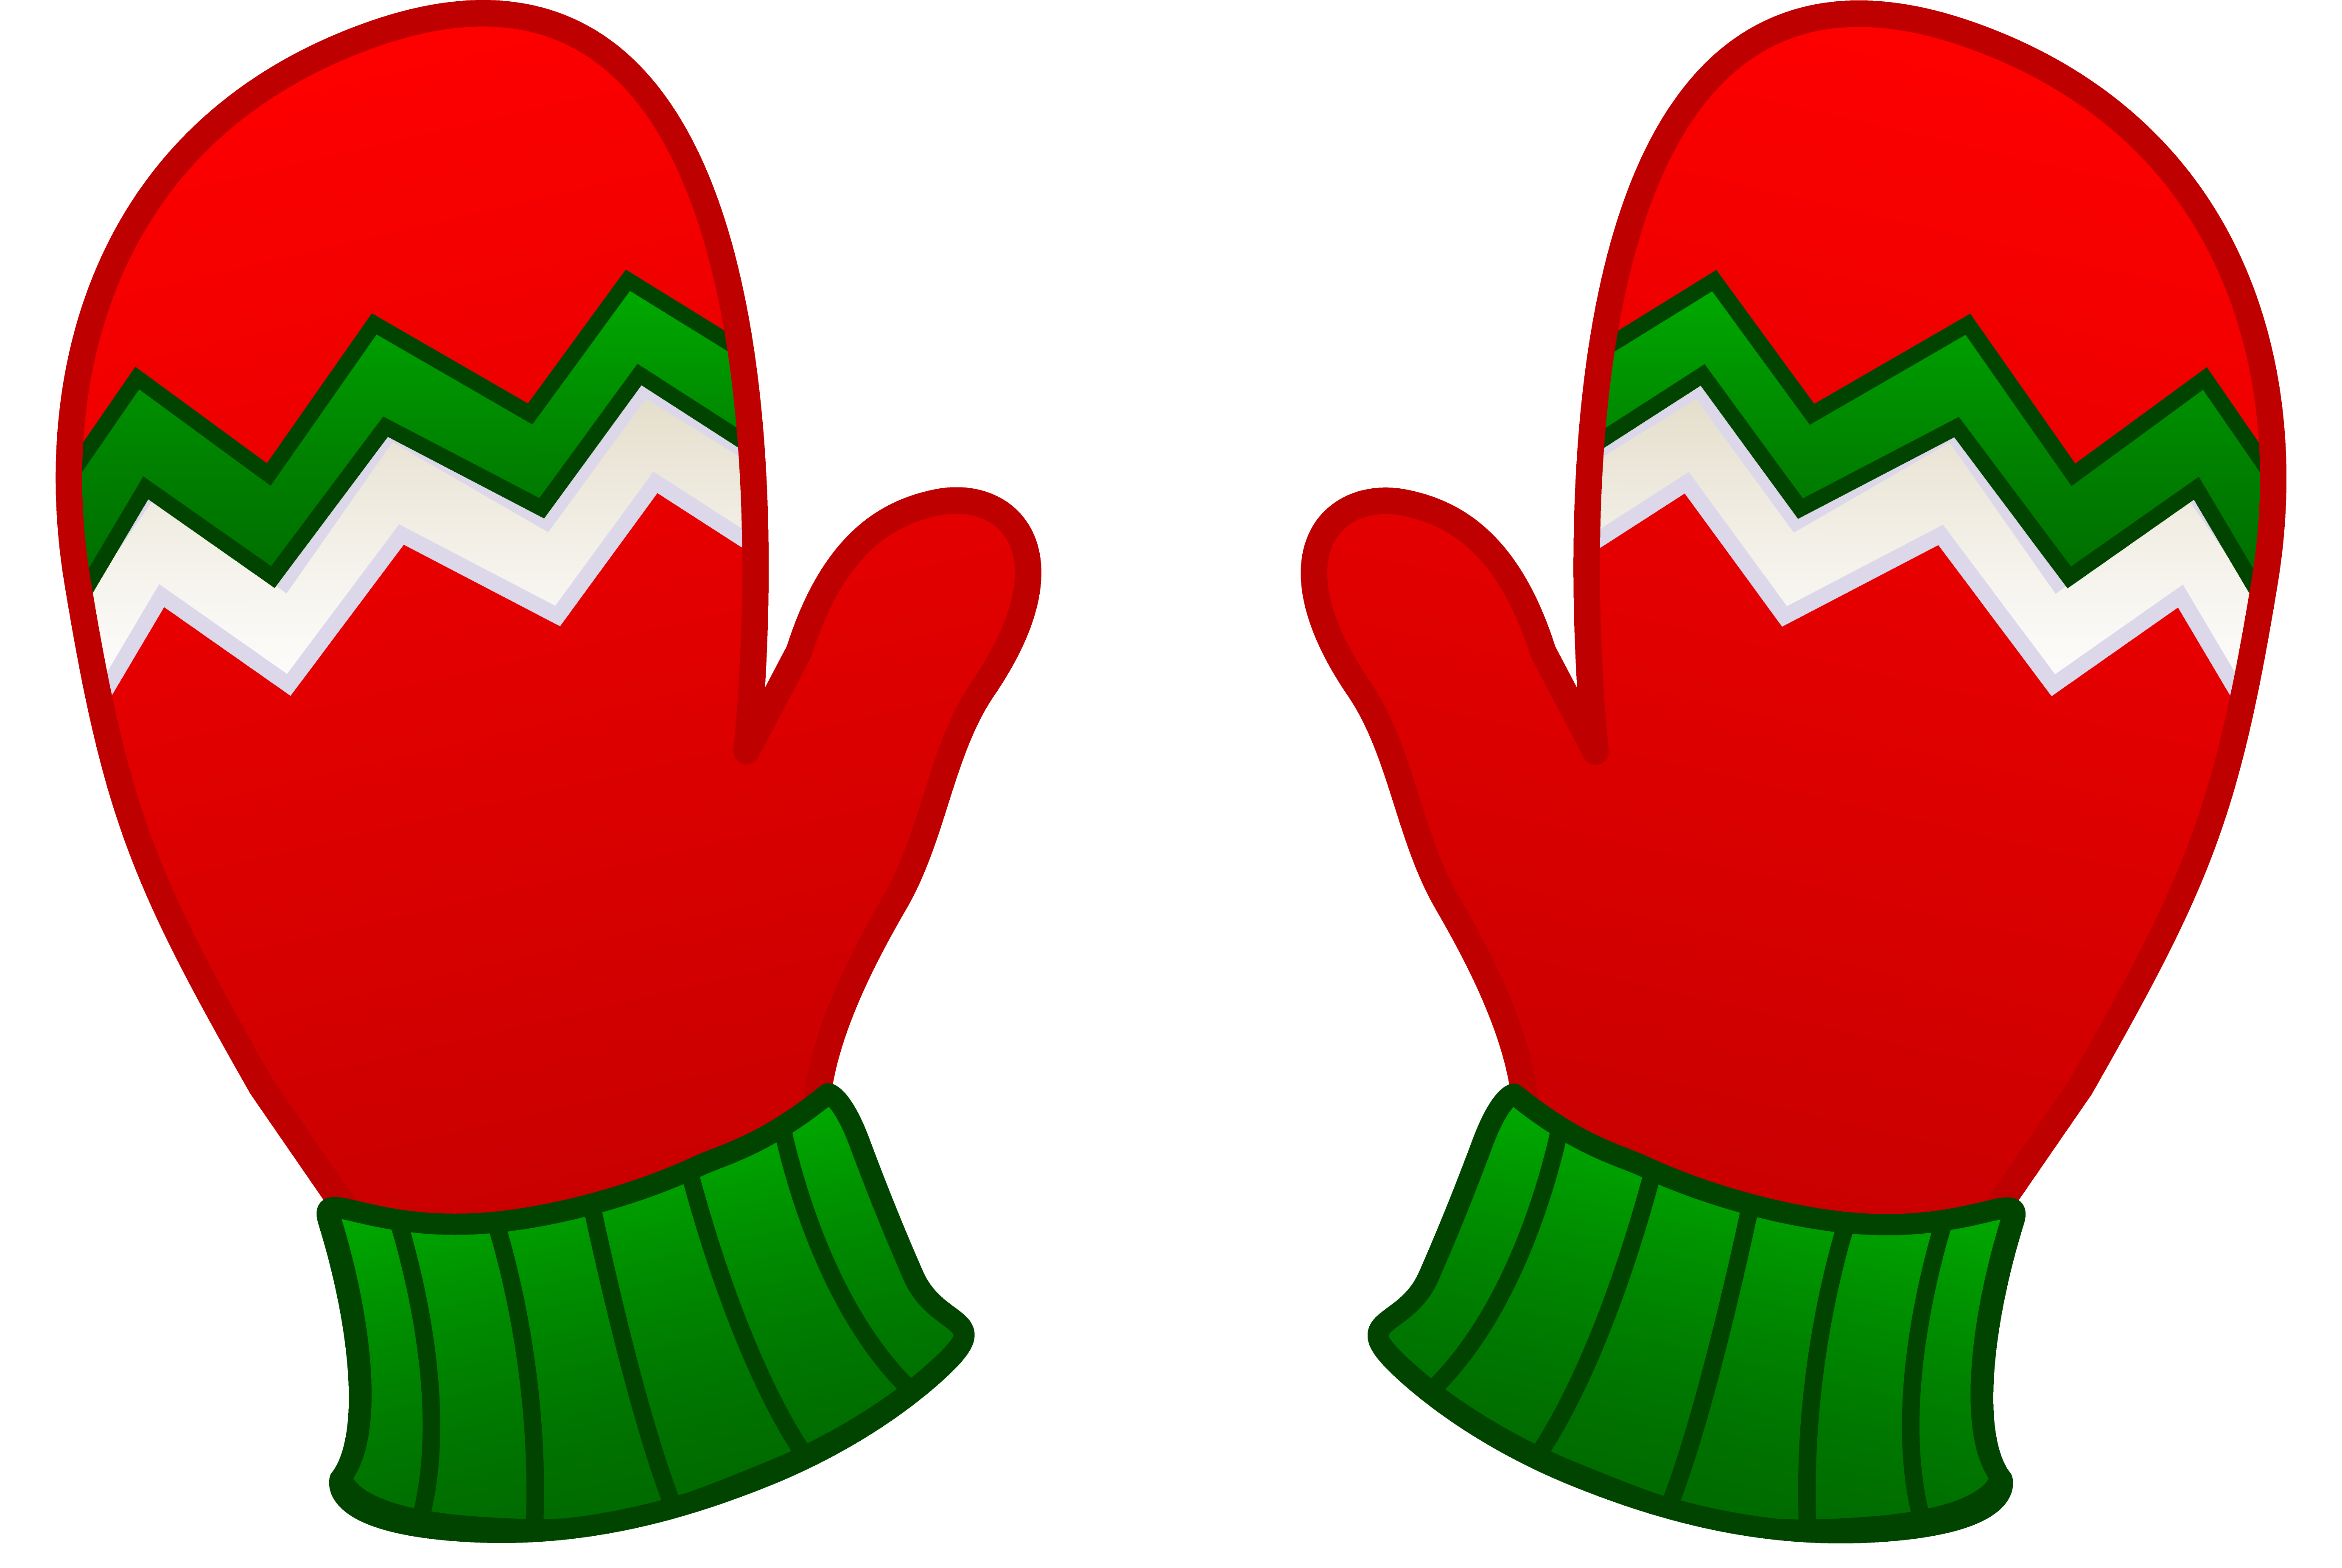 Winter Gloves Clip Art Images & Pictures - Becuo